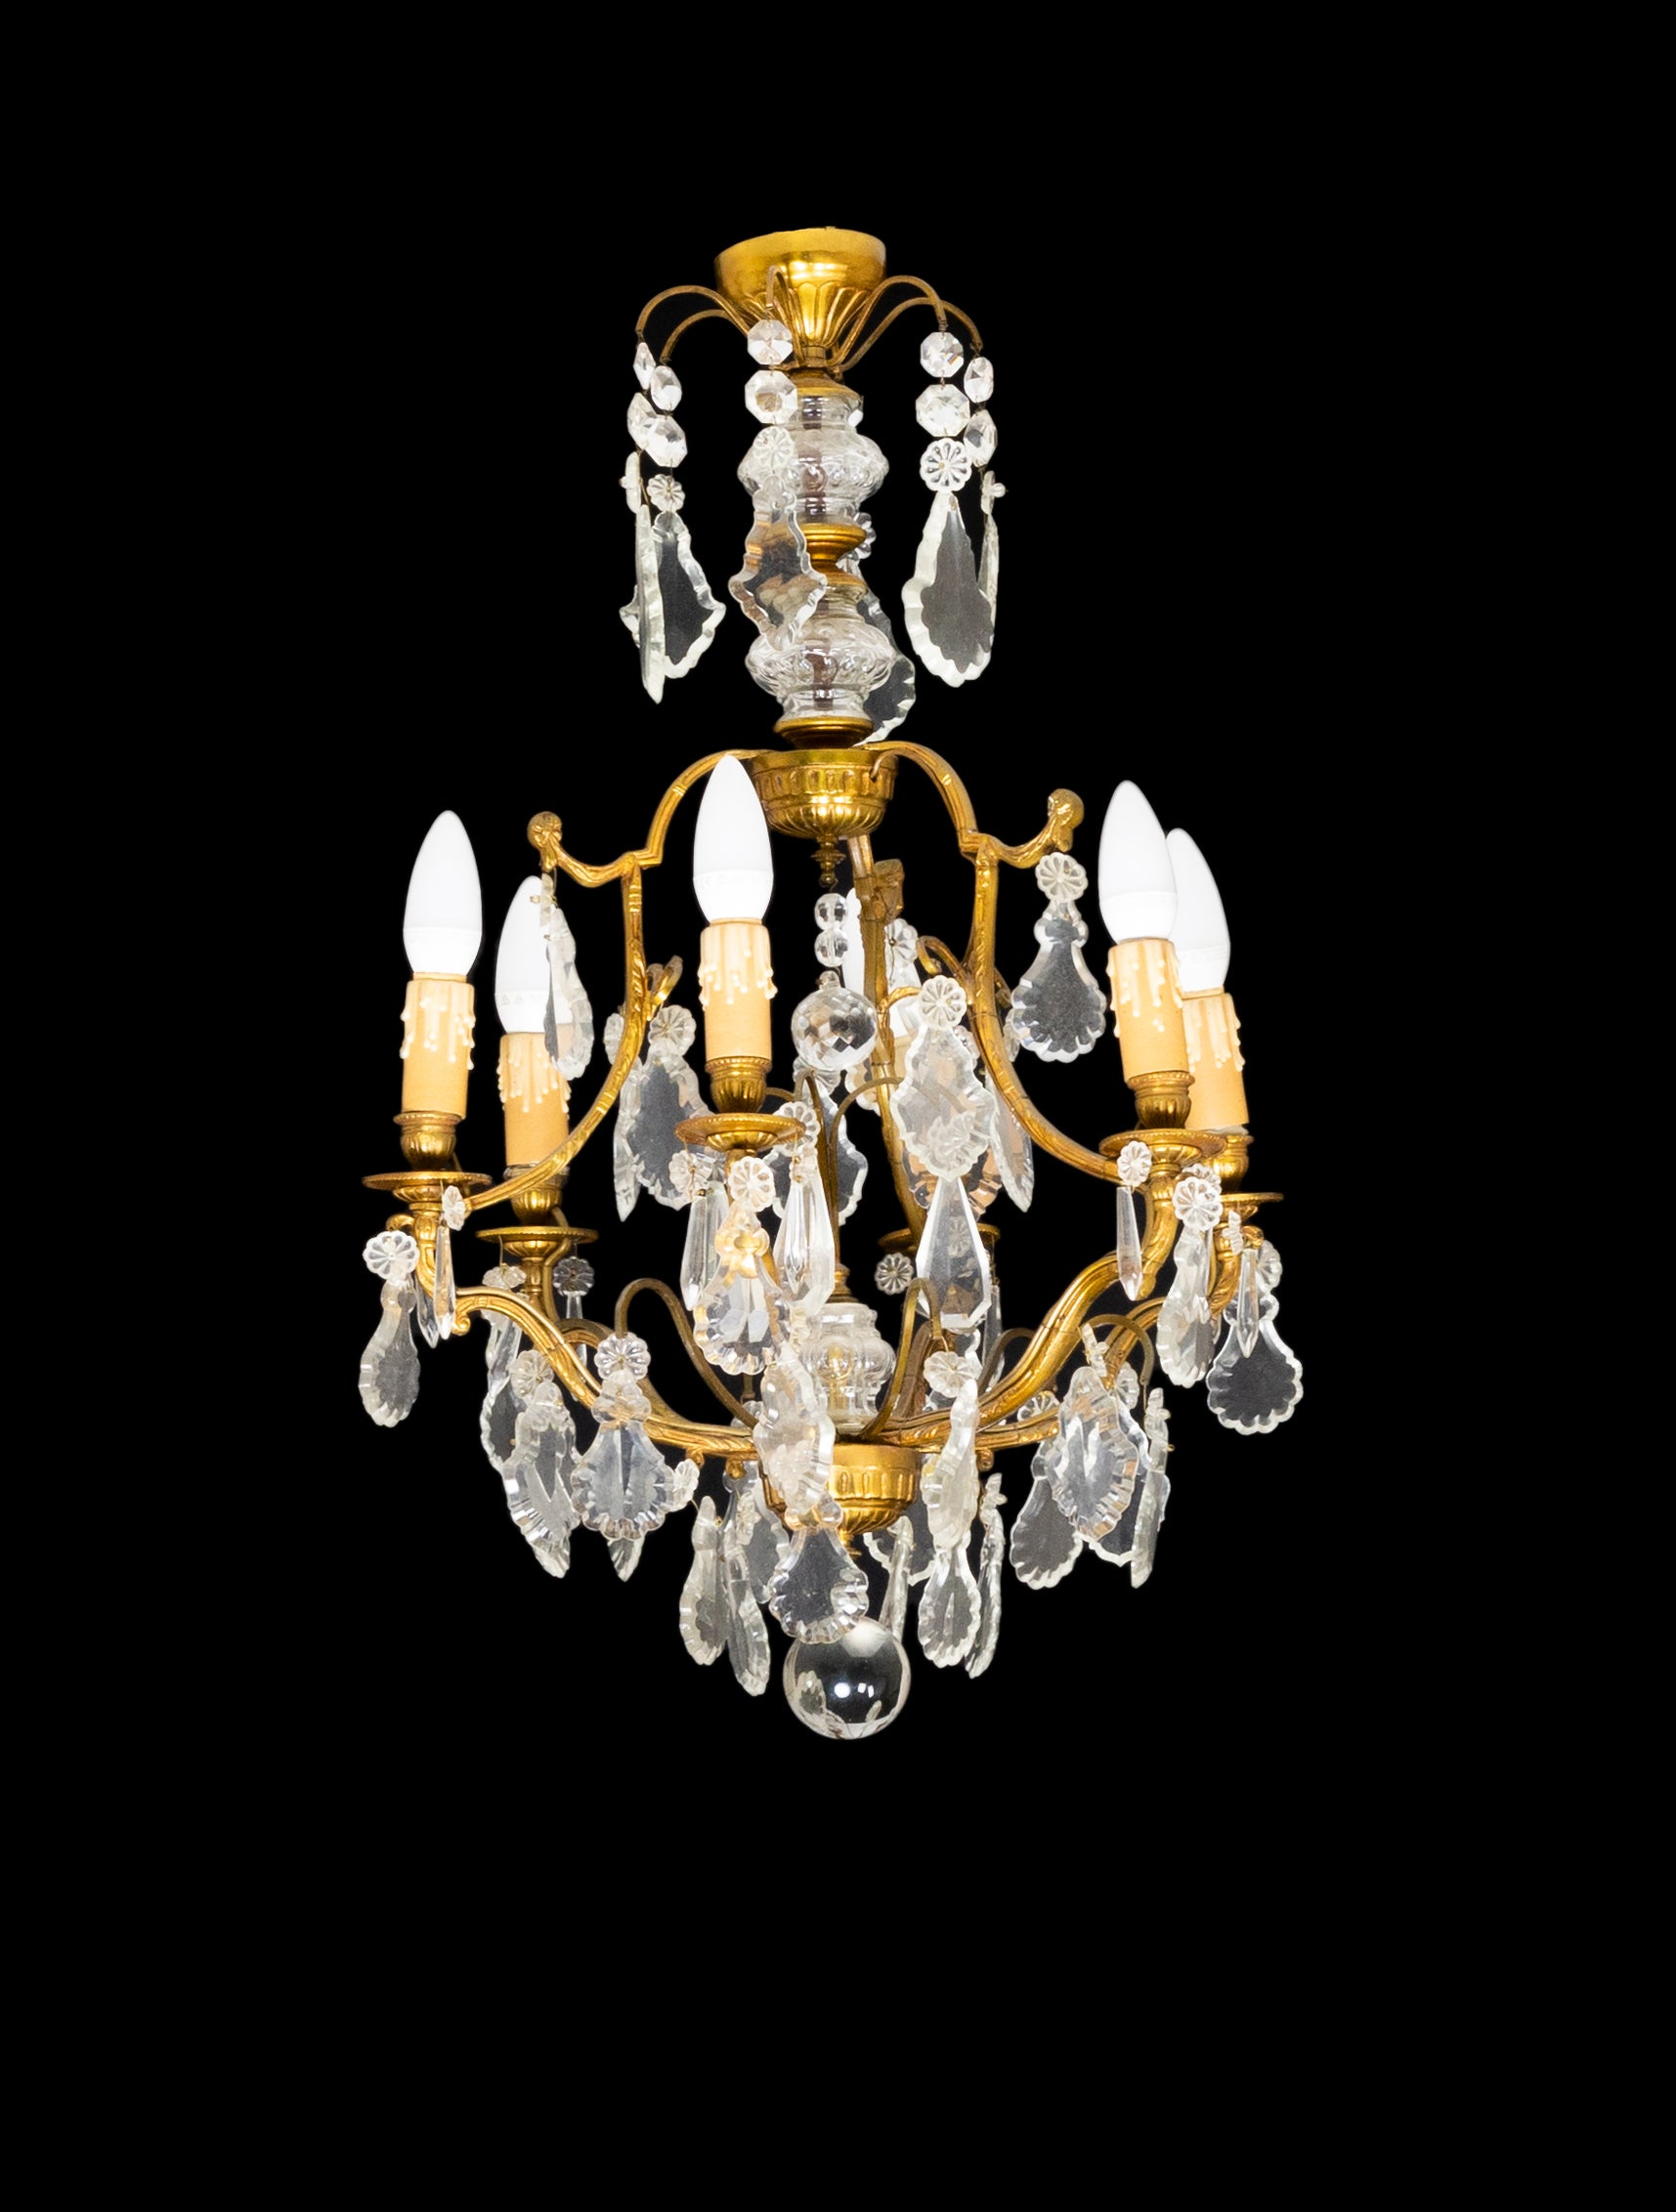 A Louis XV-Style bronze chandelier with twisted effect, glass pendants and finials, completed and rewired.
Six candlestick holders and six light sockets working. 

The chandelier is currently wired for both European Union and US standards LED